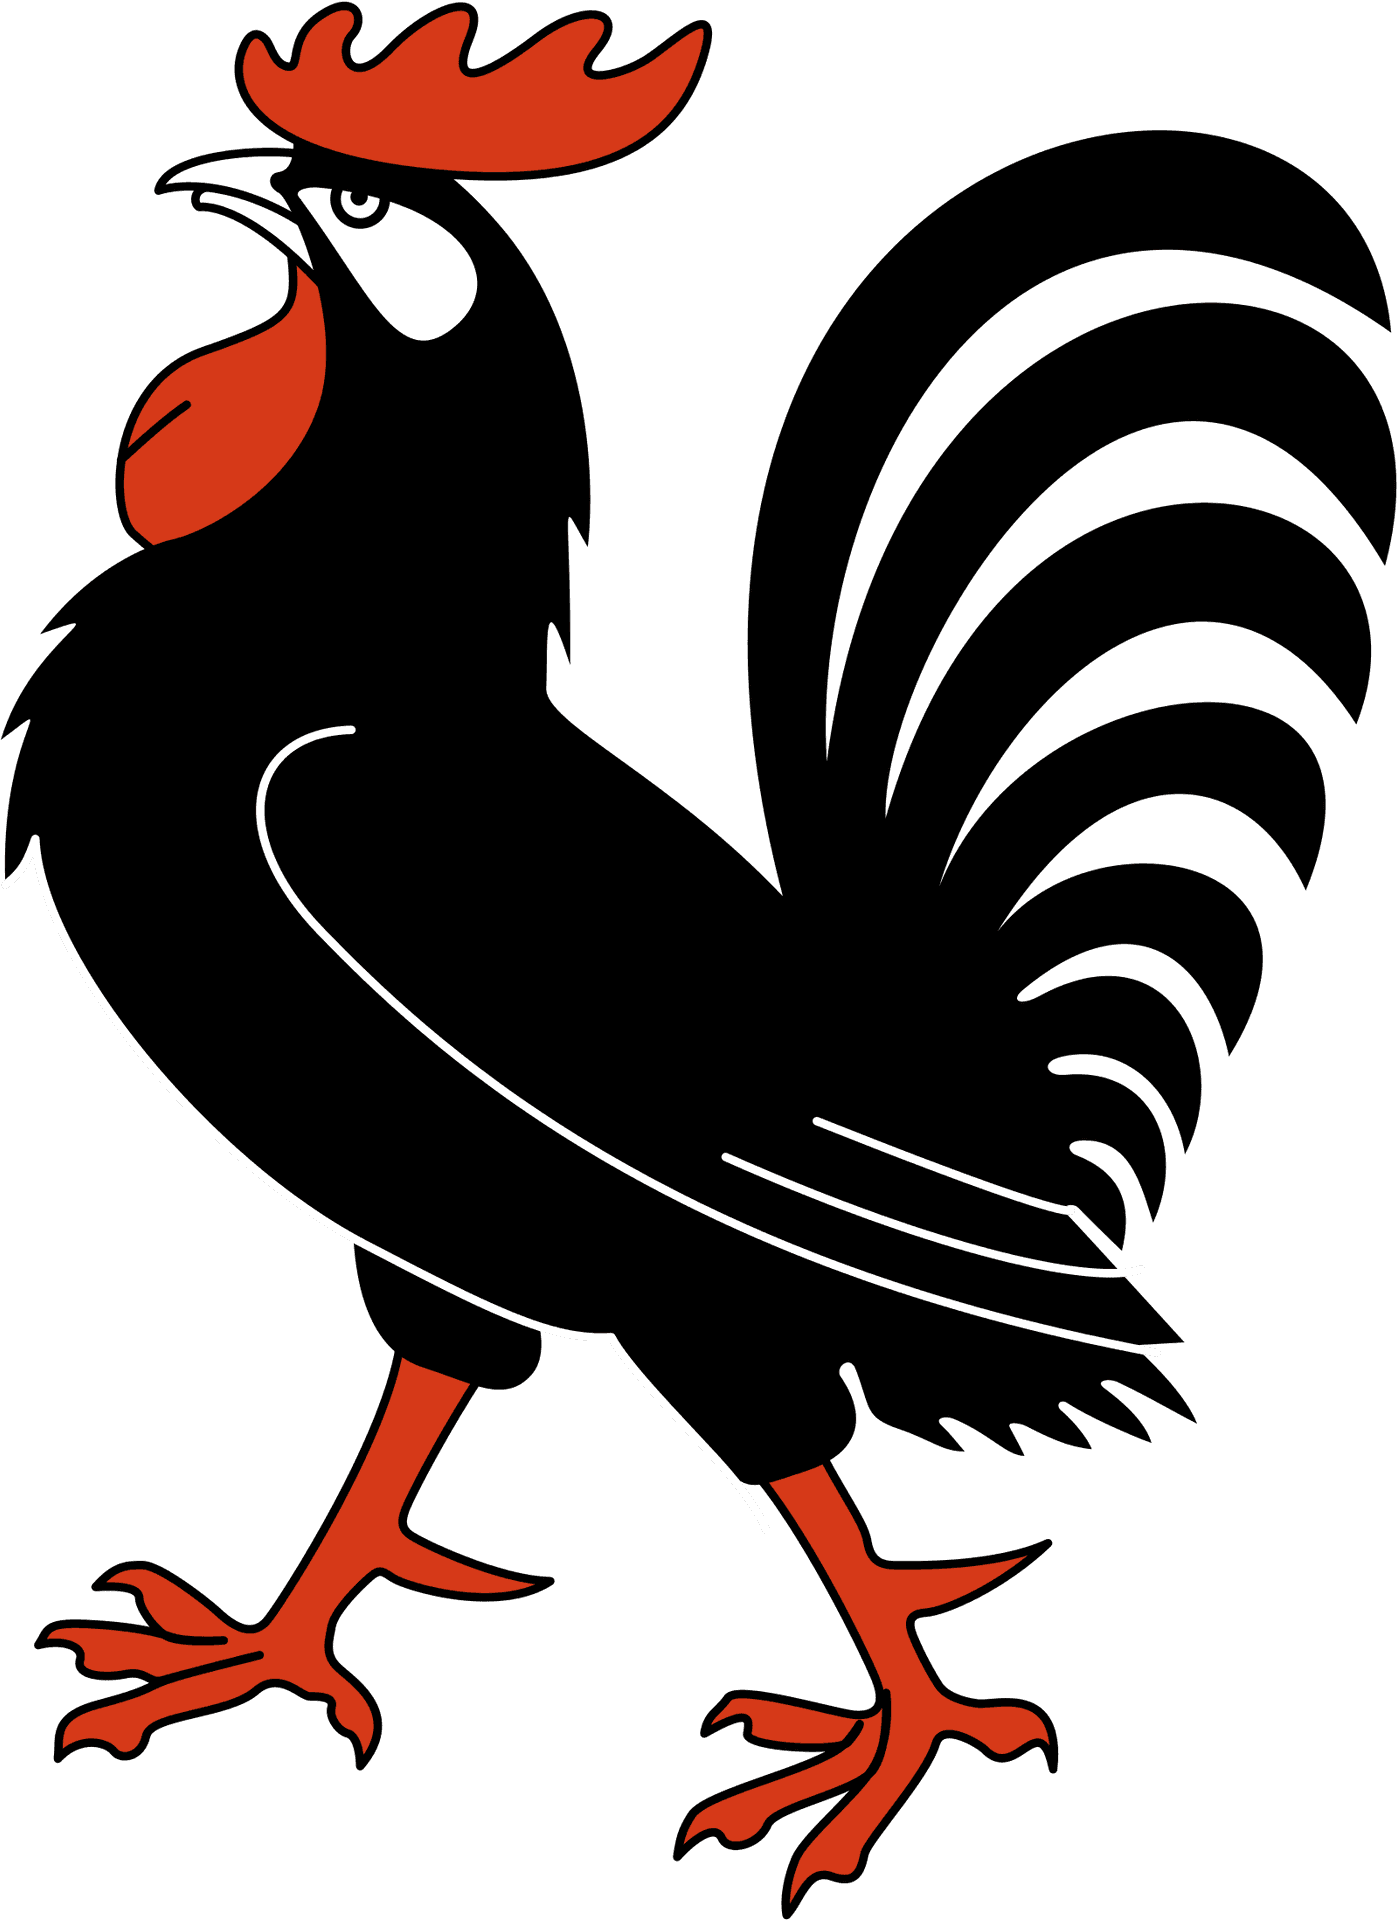 Stylized Rooster Illustration PNG image